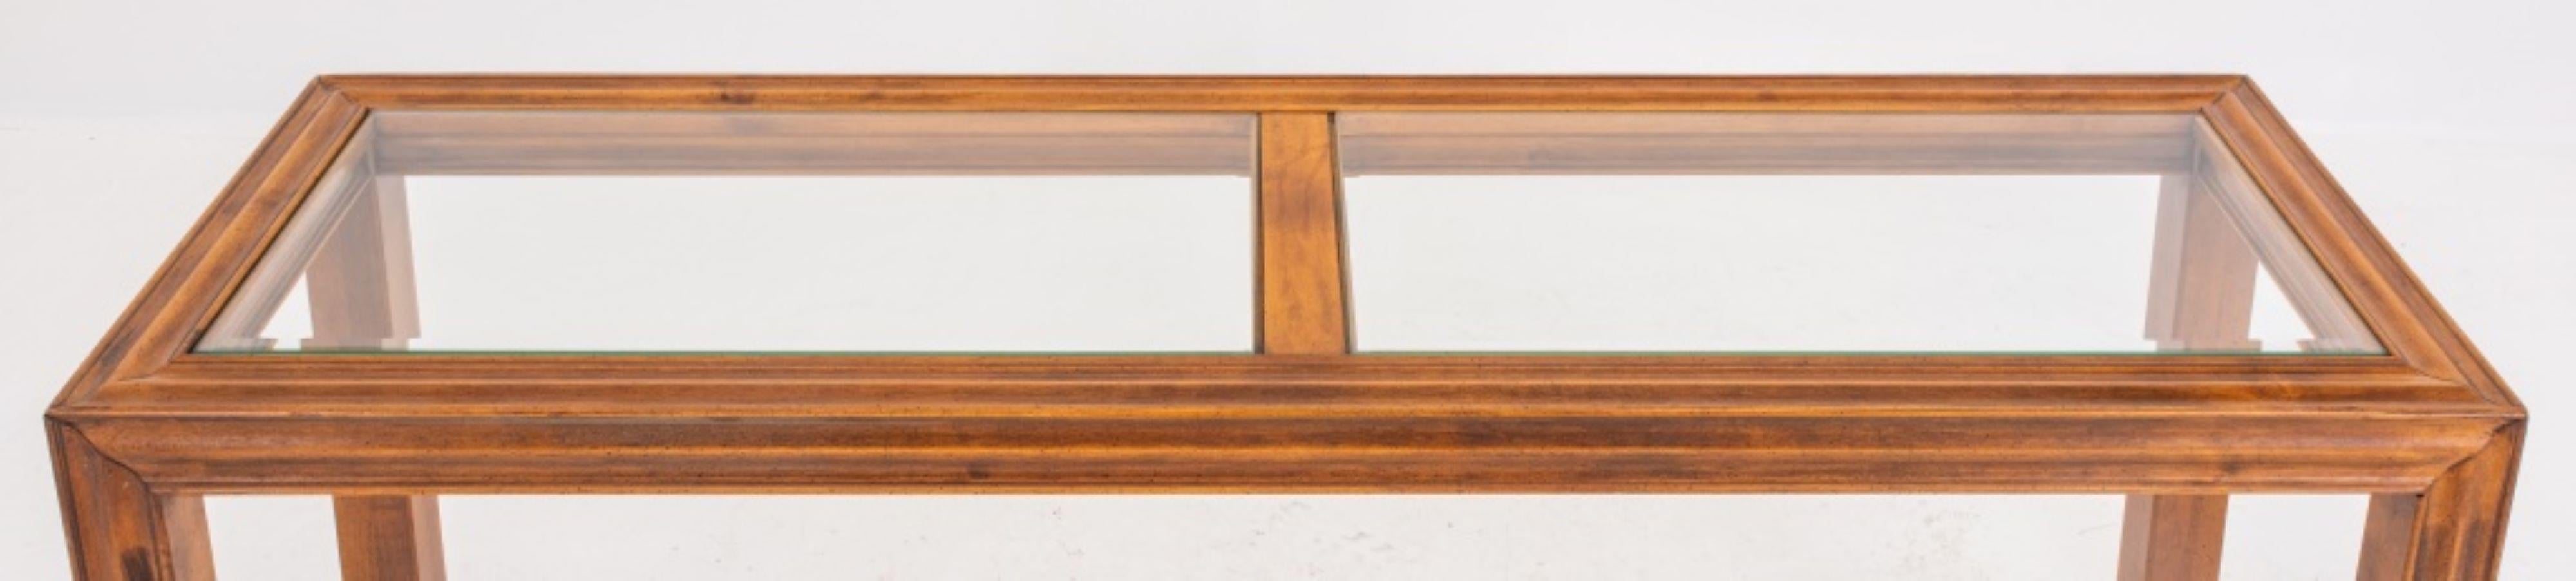 Widdicomb Manner Modern Wood and Glass Table, 1980s In Good Condition For Sale In New York, NY